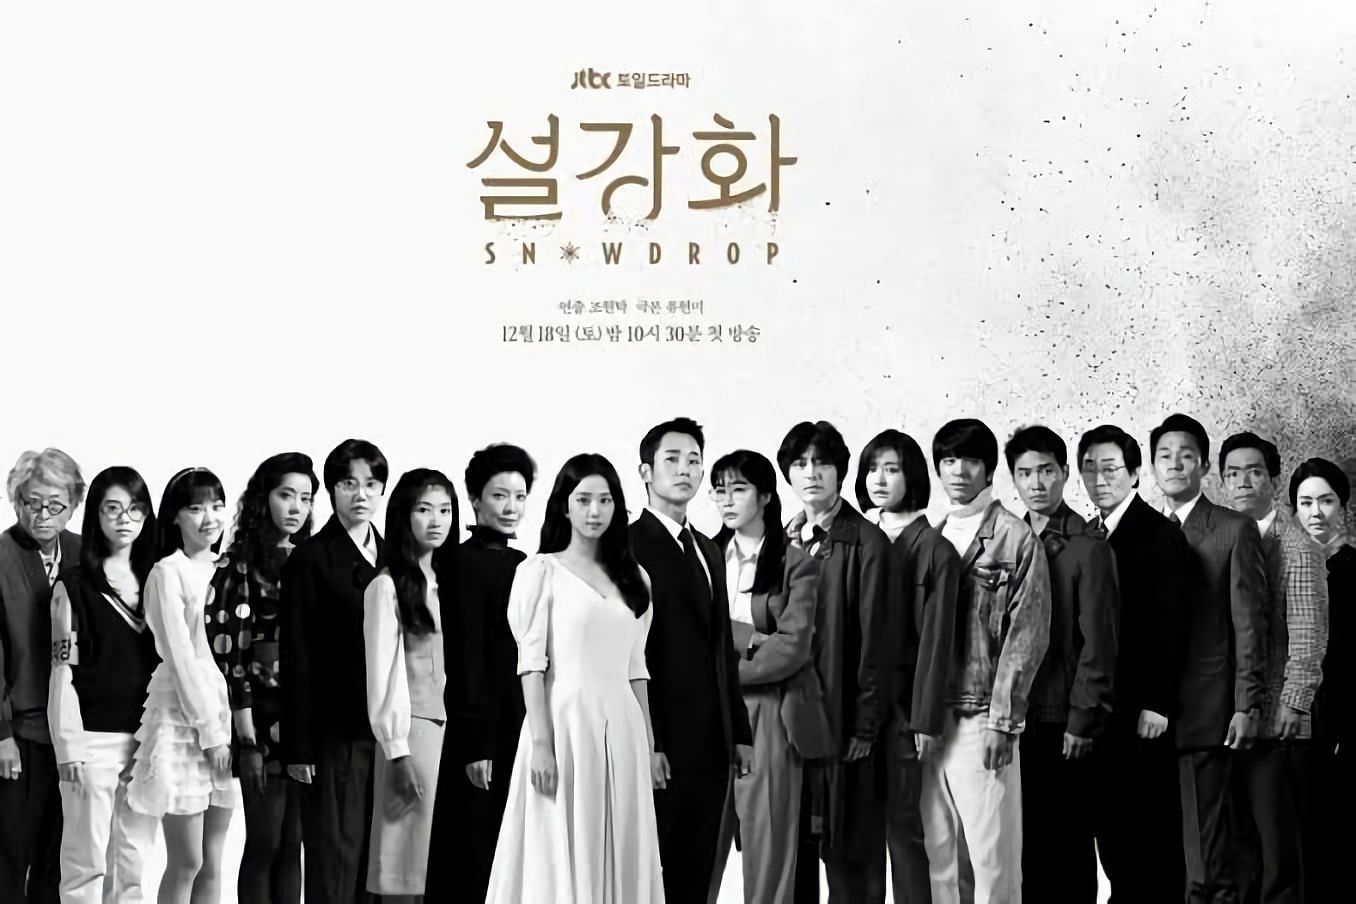 Snowdrop aired its last episode on January 30 (Image via JTBC)